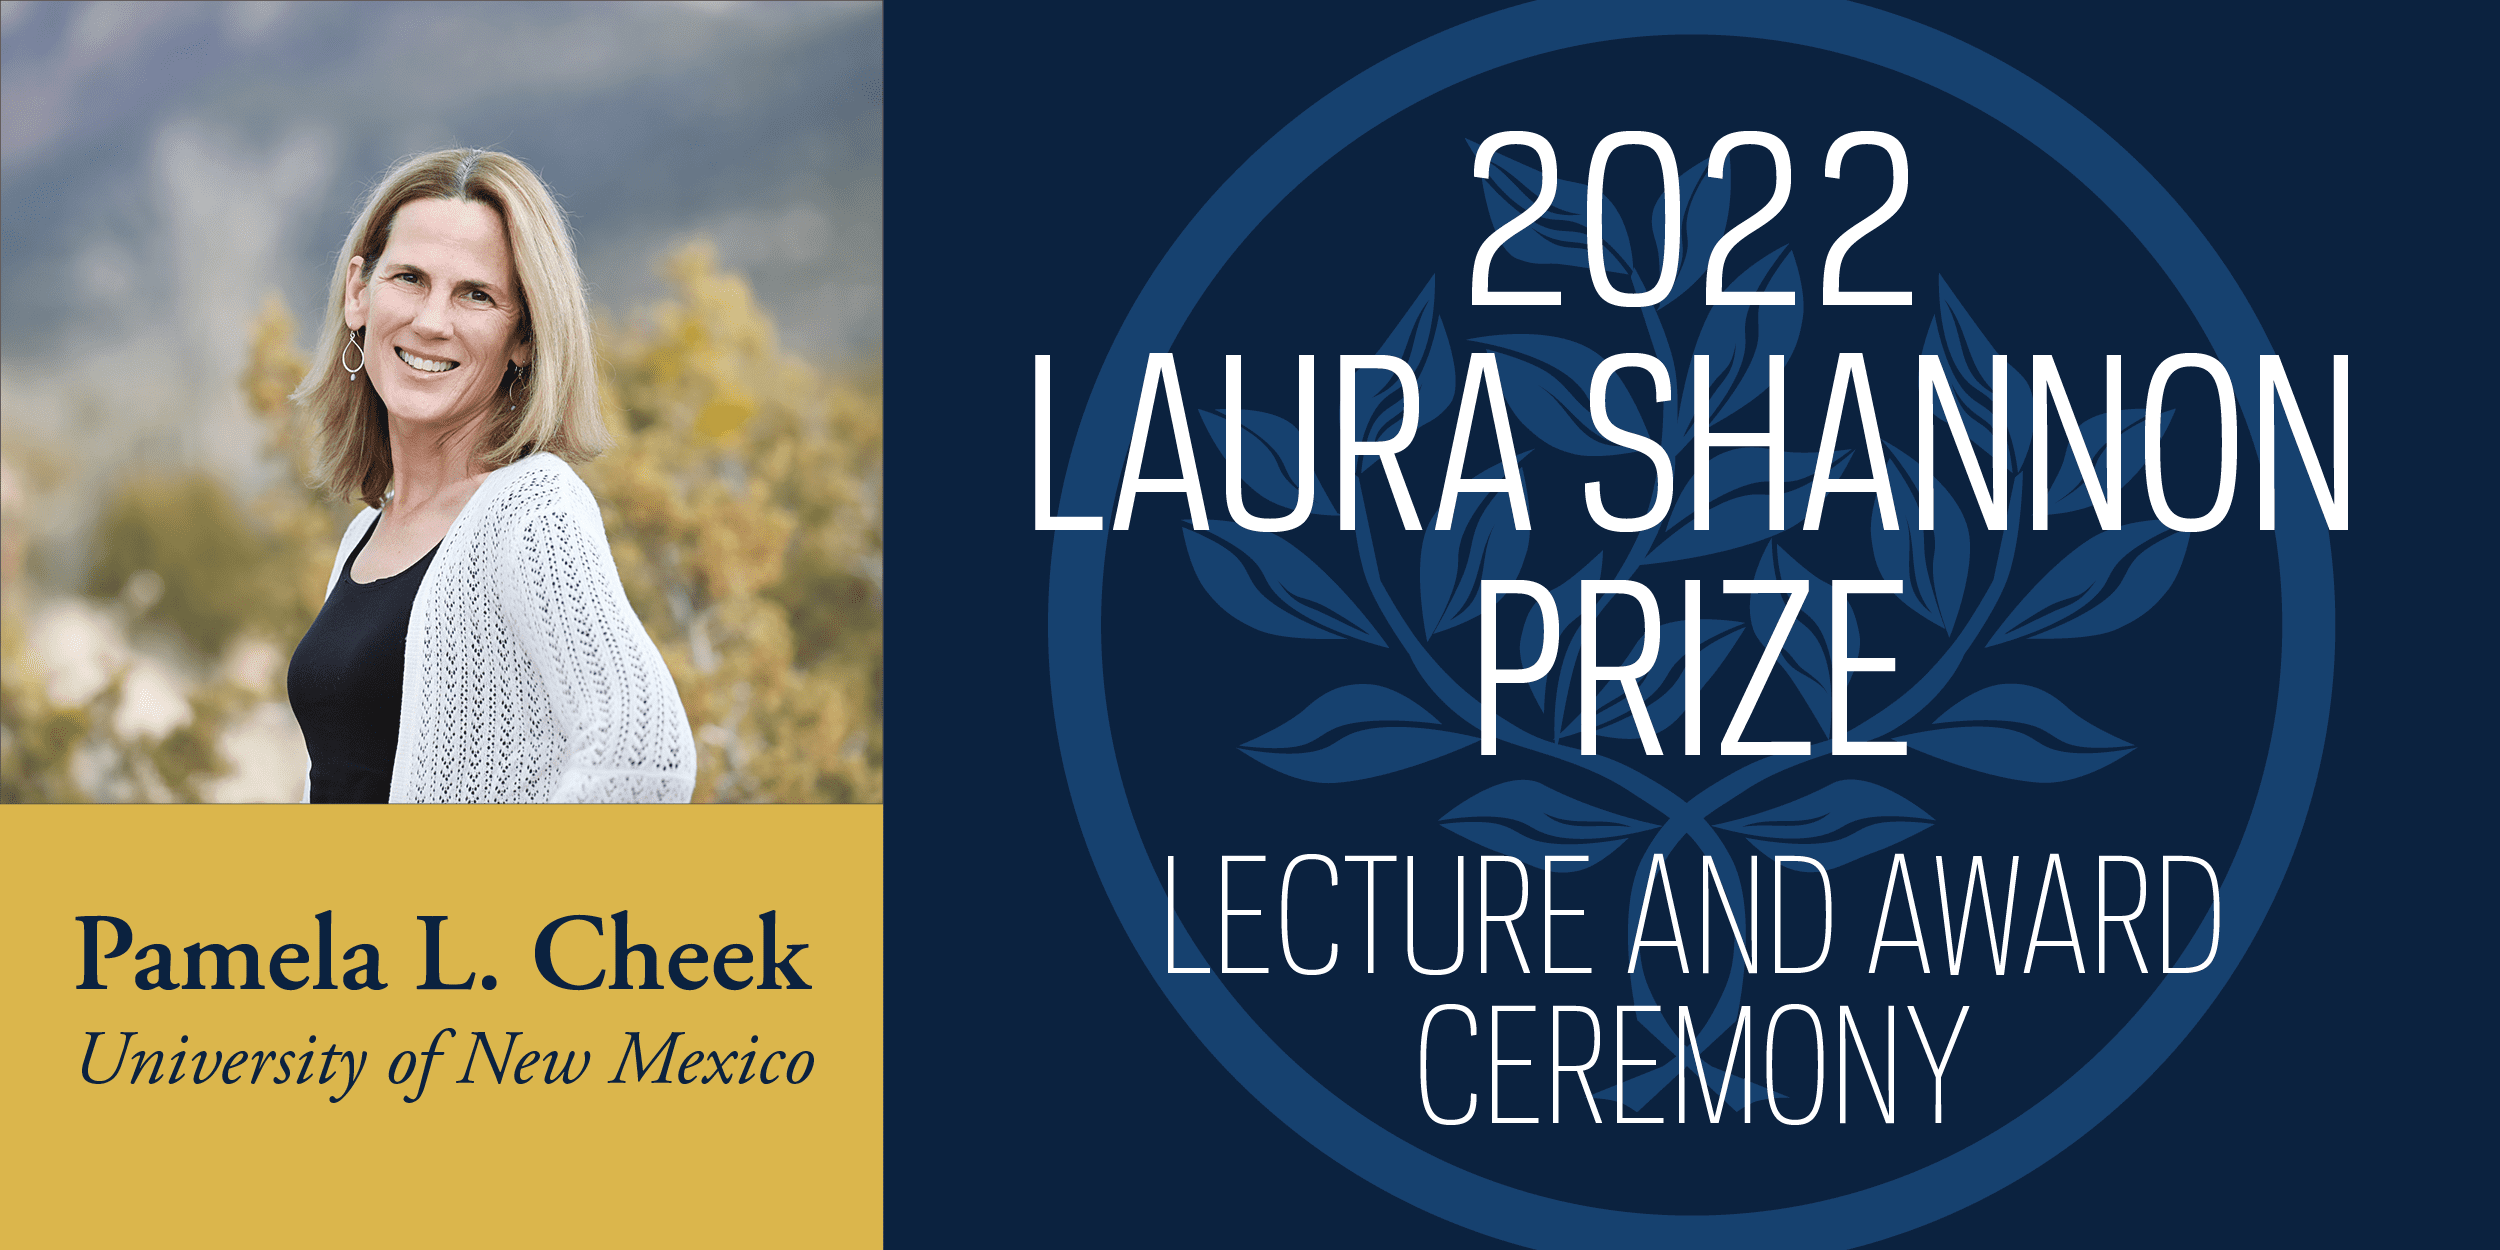 The 2022 Laura Shannon Prize with Pamela Cheek: “The Literary ‘Me Too’ of the 18th Century: Women’s Writing and the Capital of Virtue”